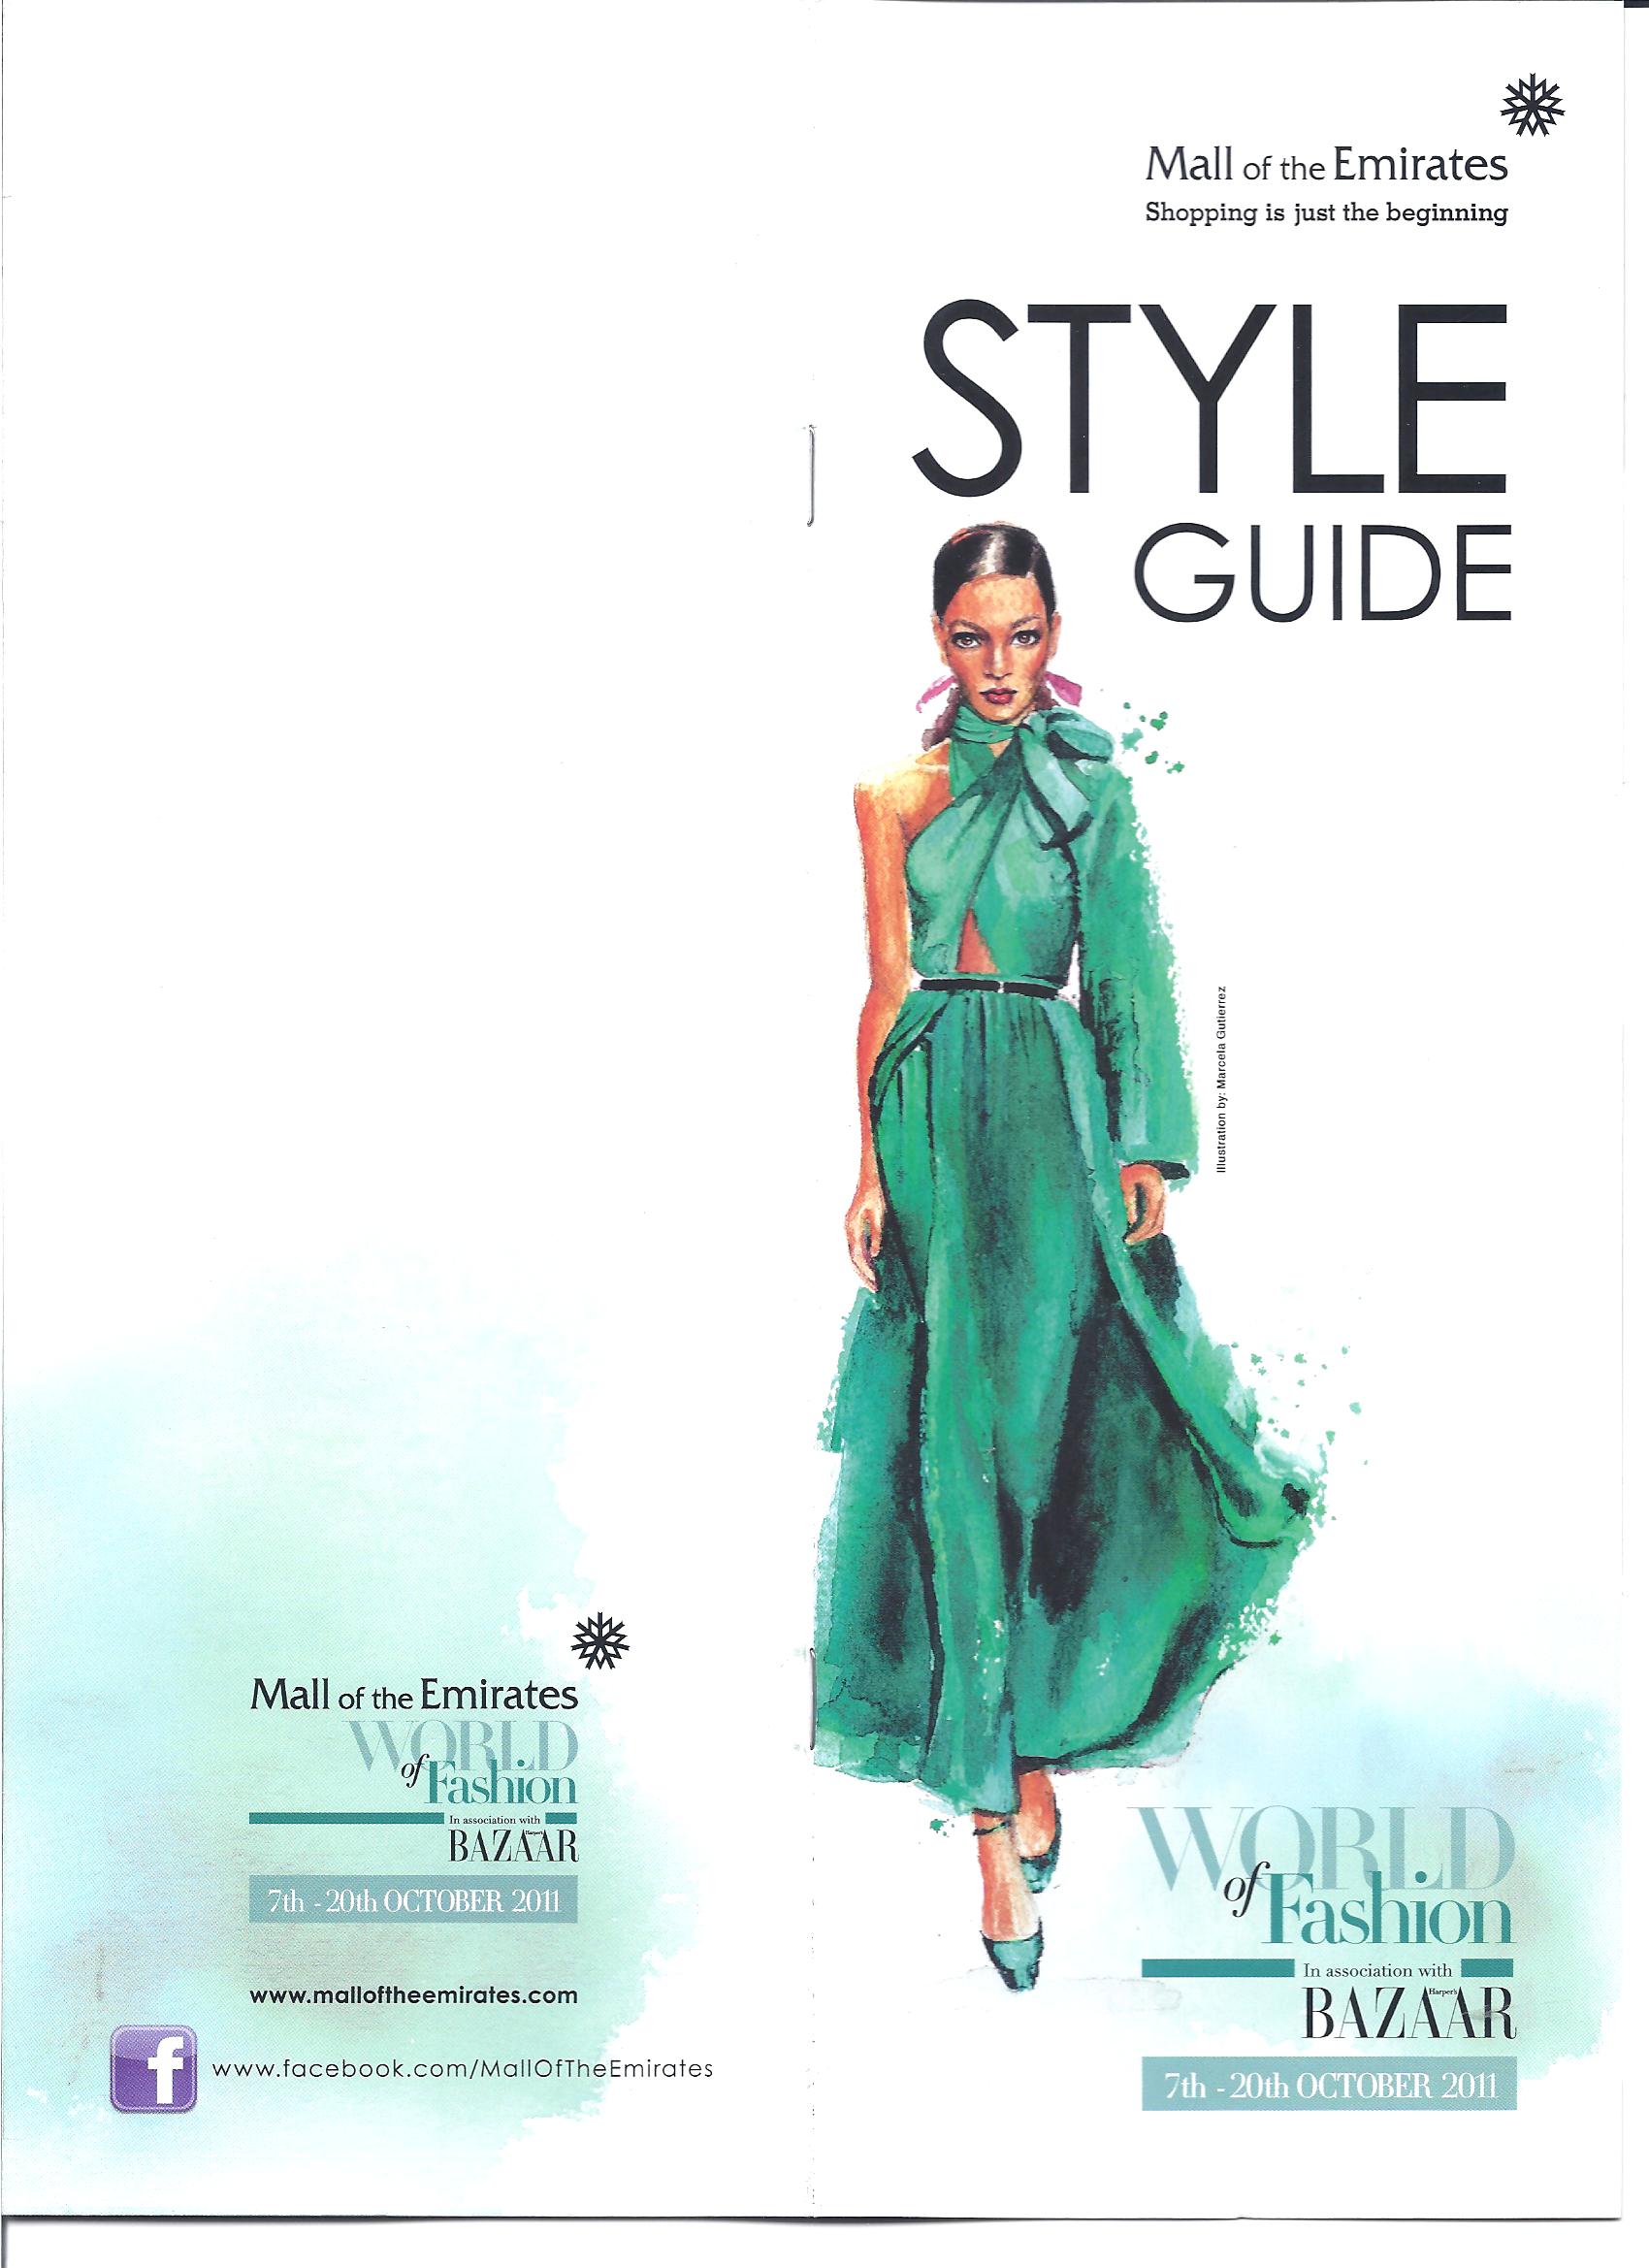 My AW11 Style Guide for Mall of the Emirates!